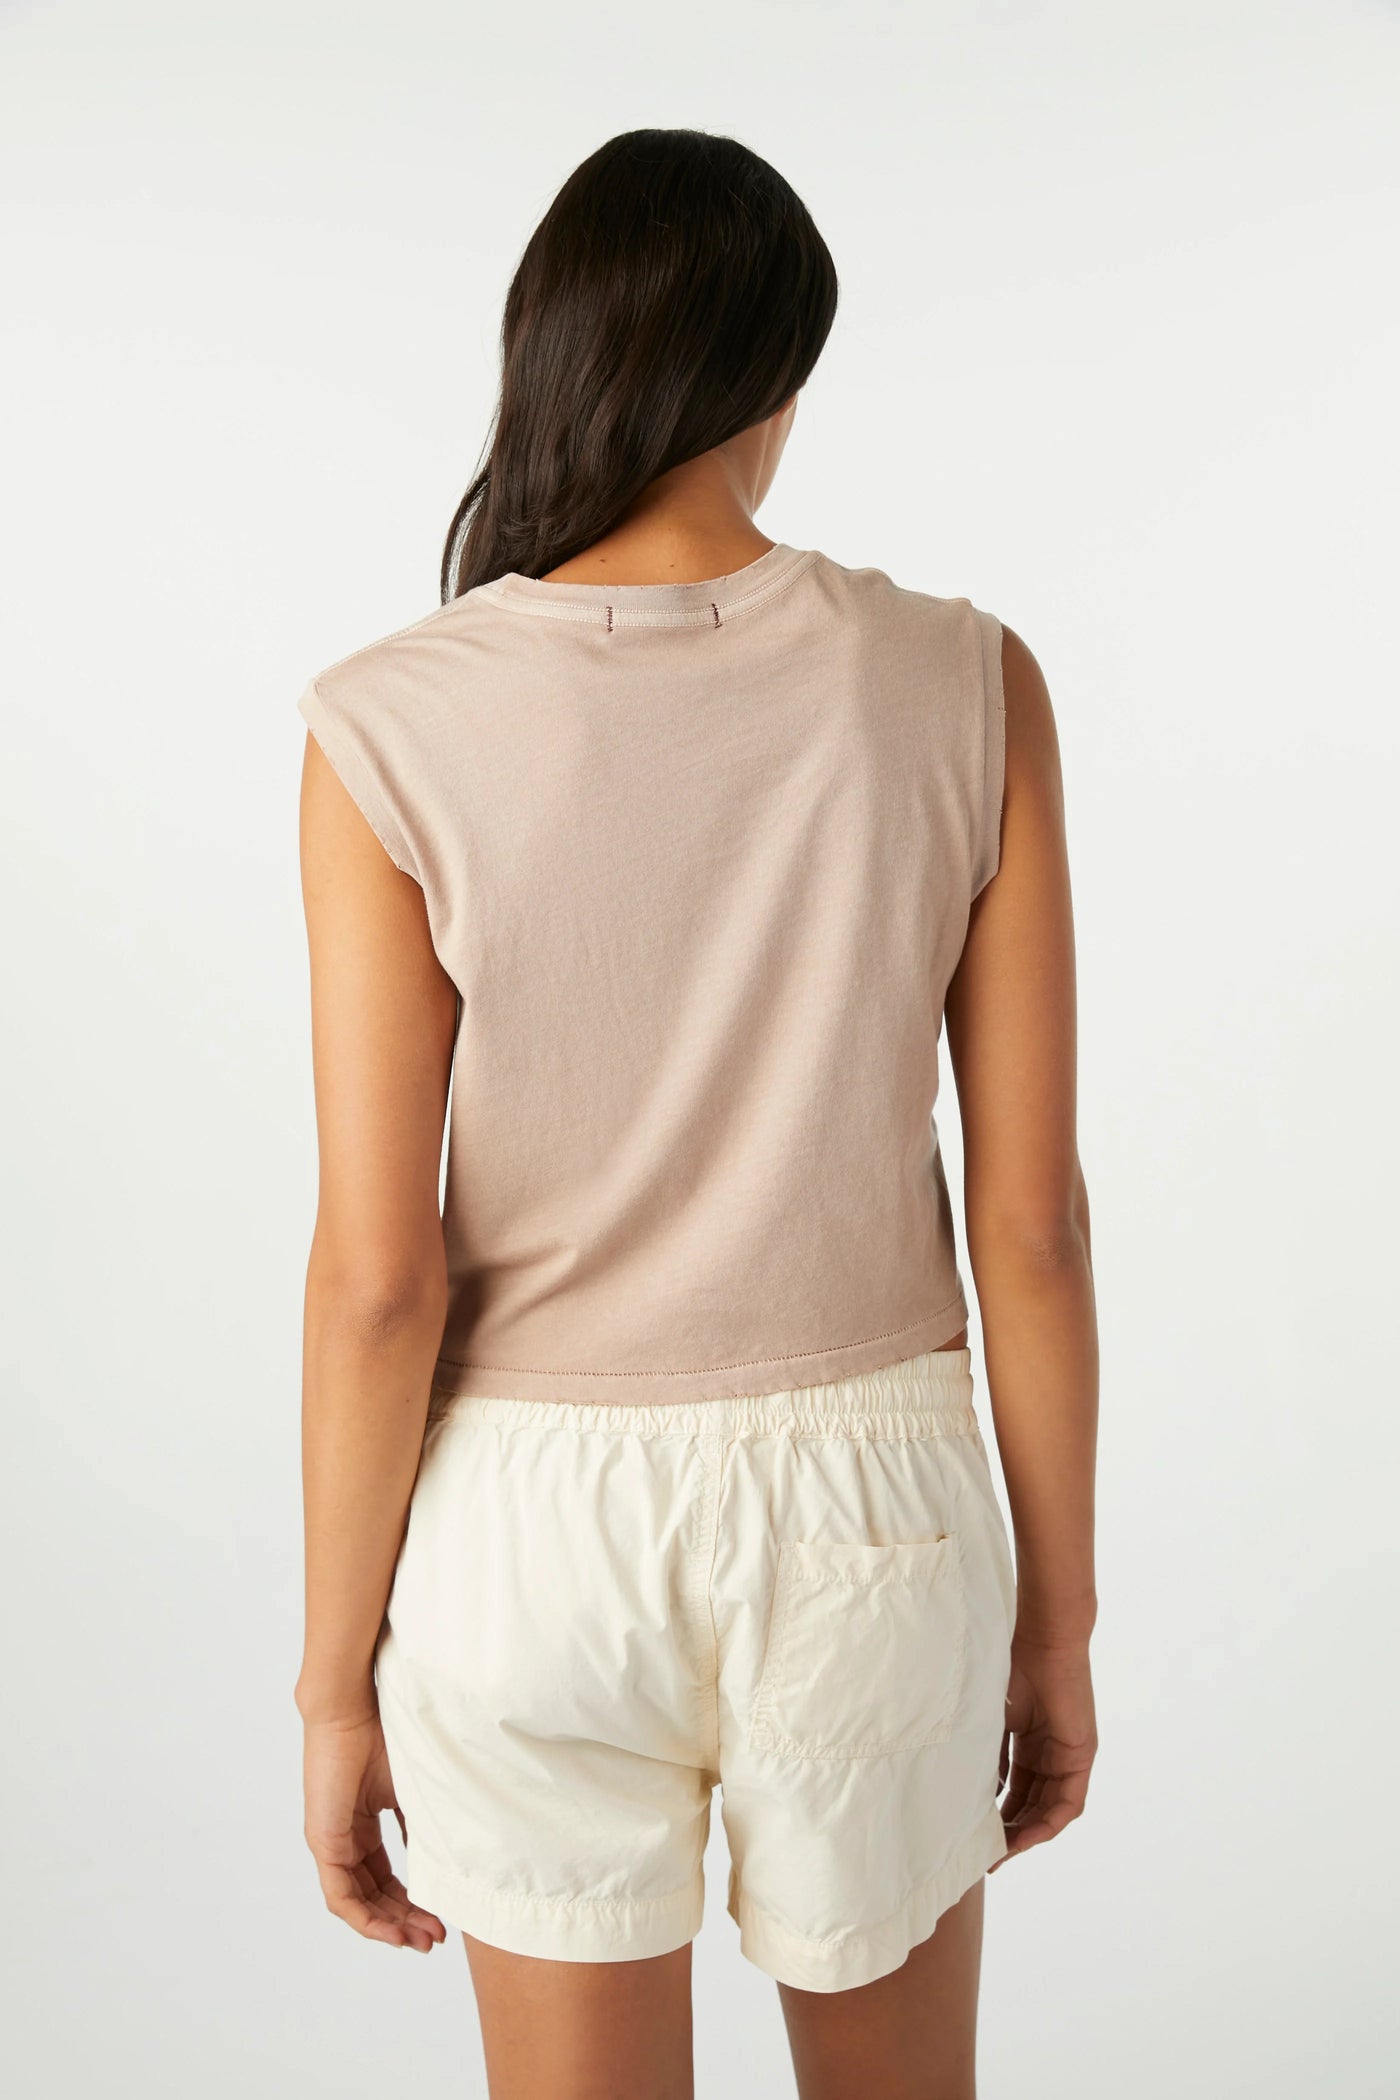 SLEEVELESS BABE TEE IN TAUPE - Romi Boutique